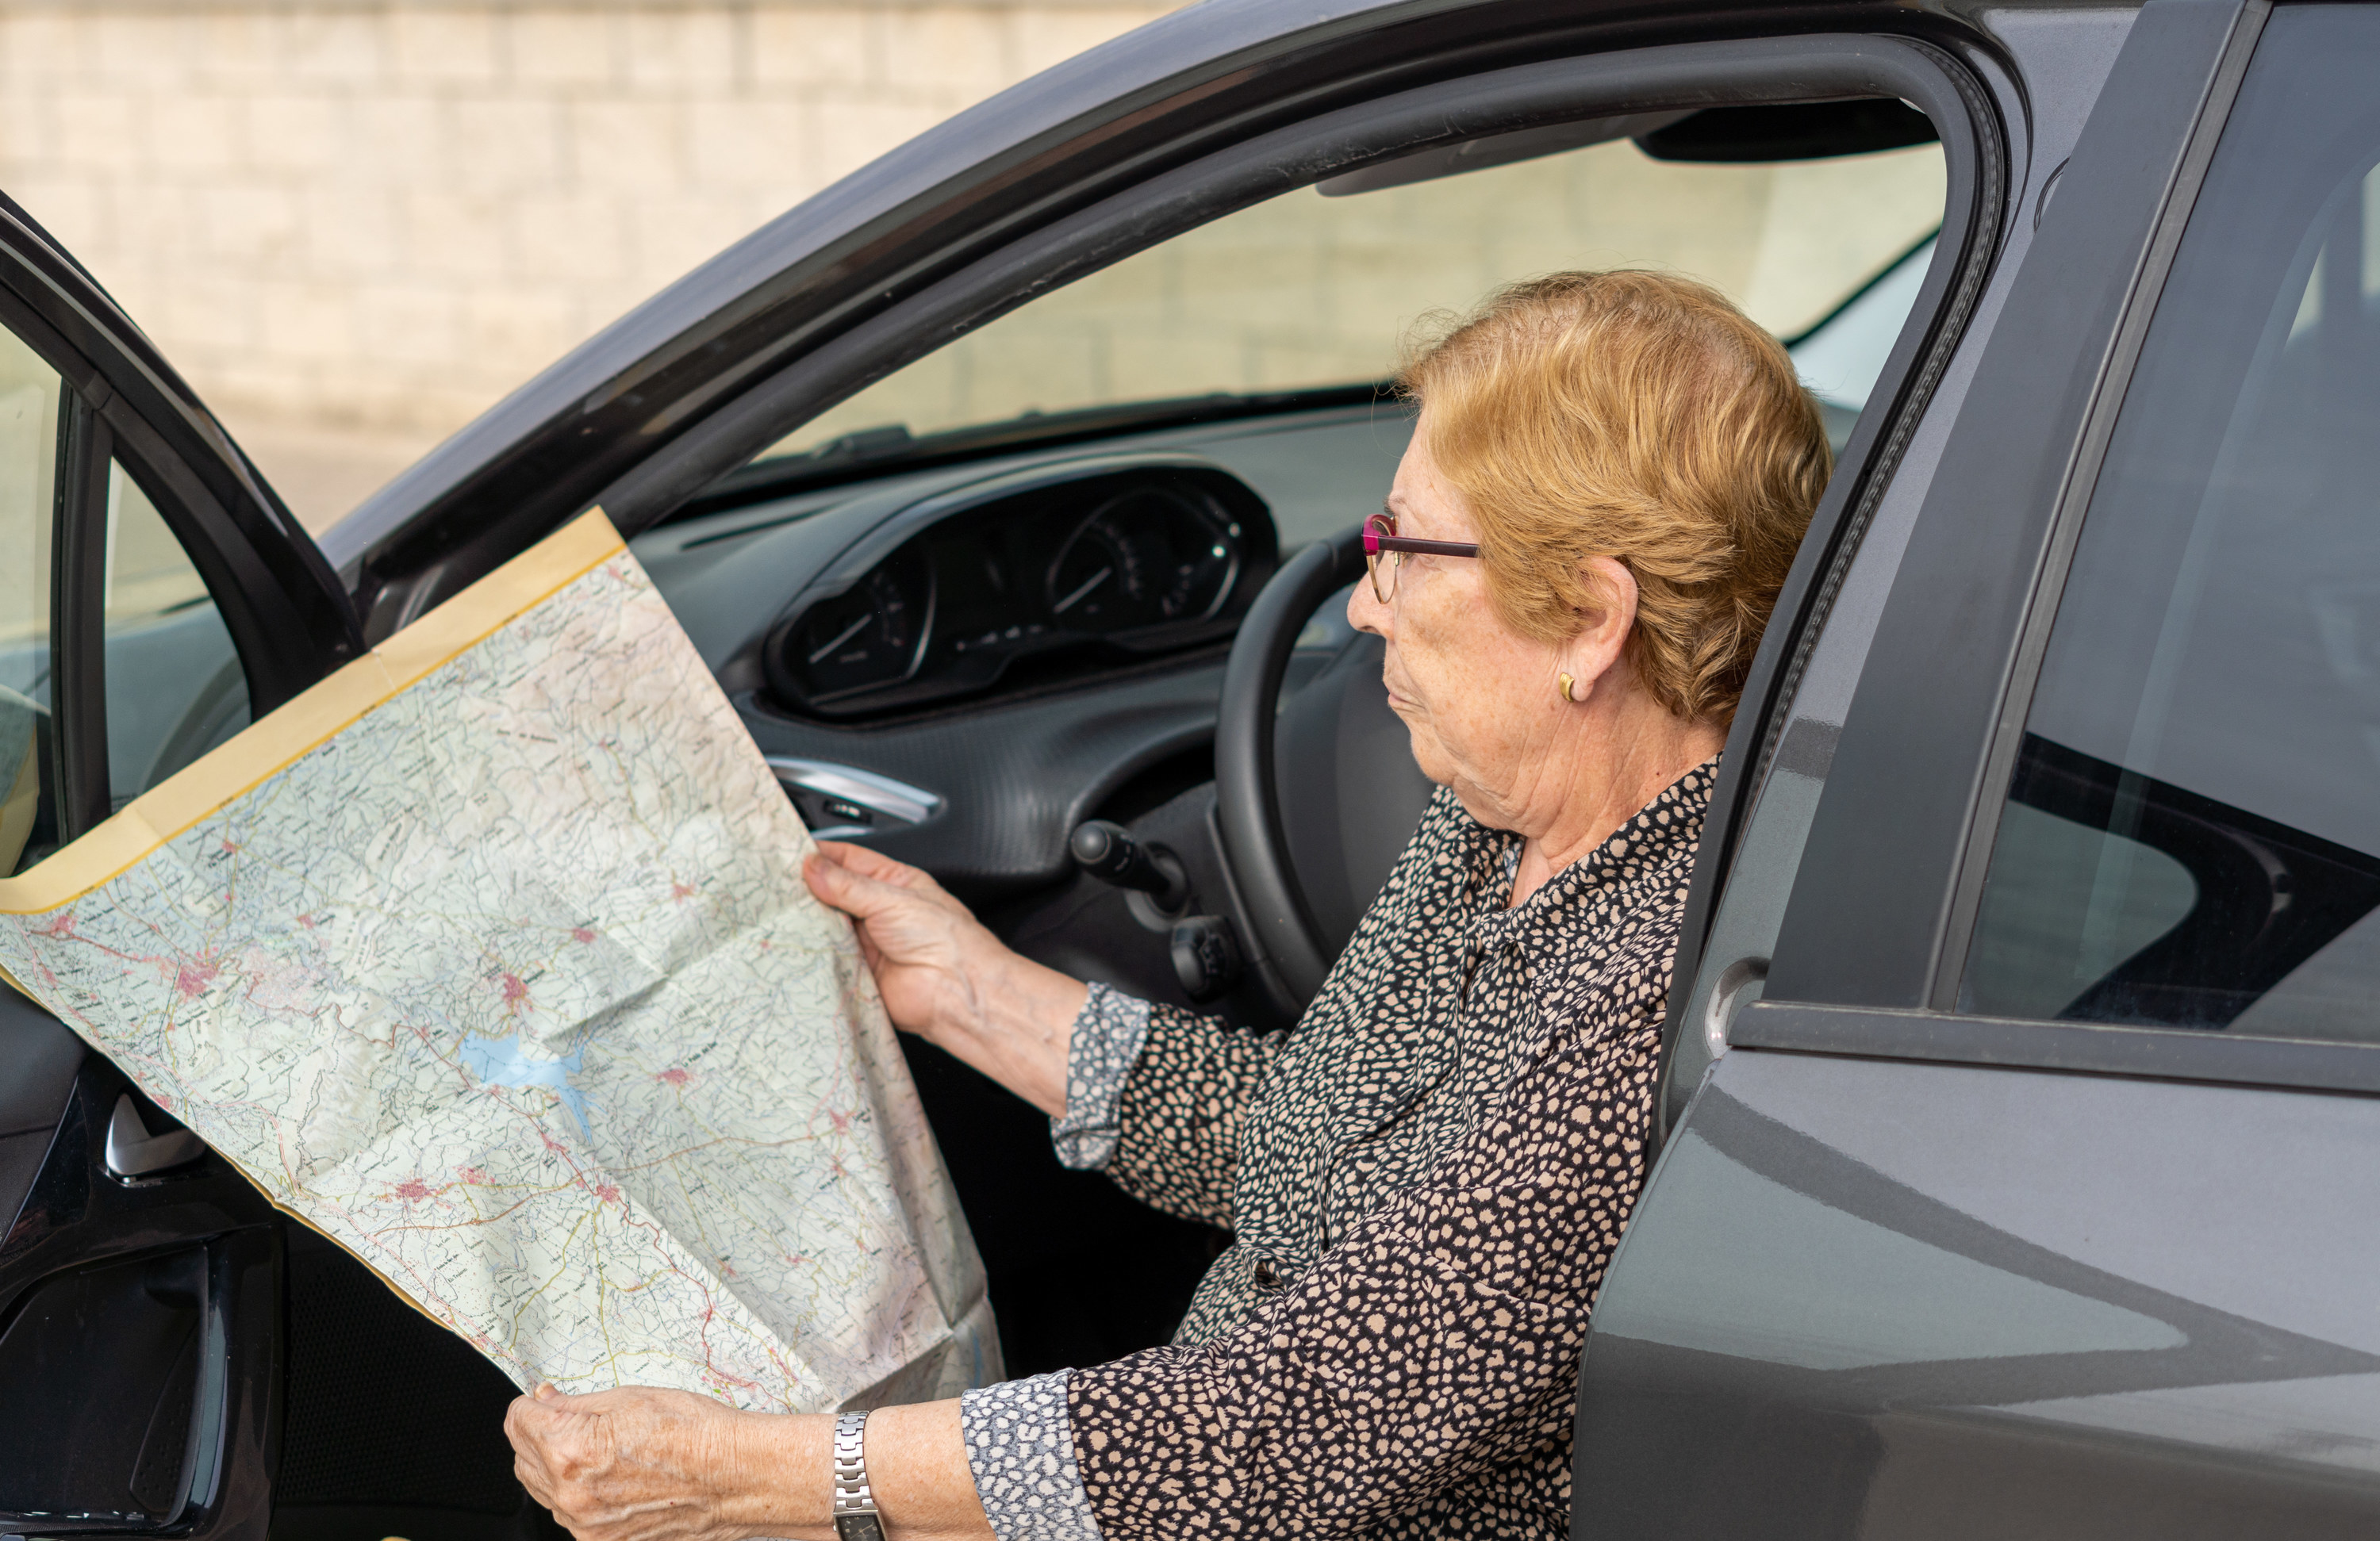 person sits in parked car, looking at a road map